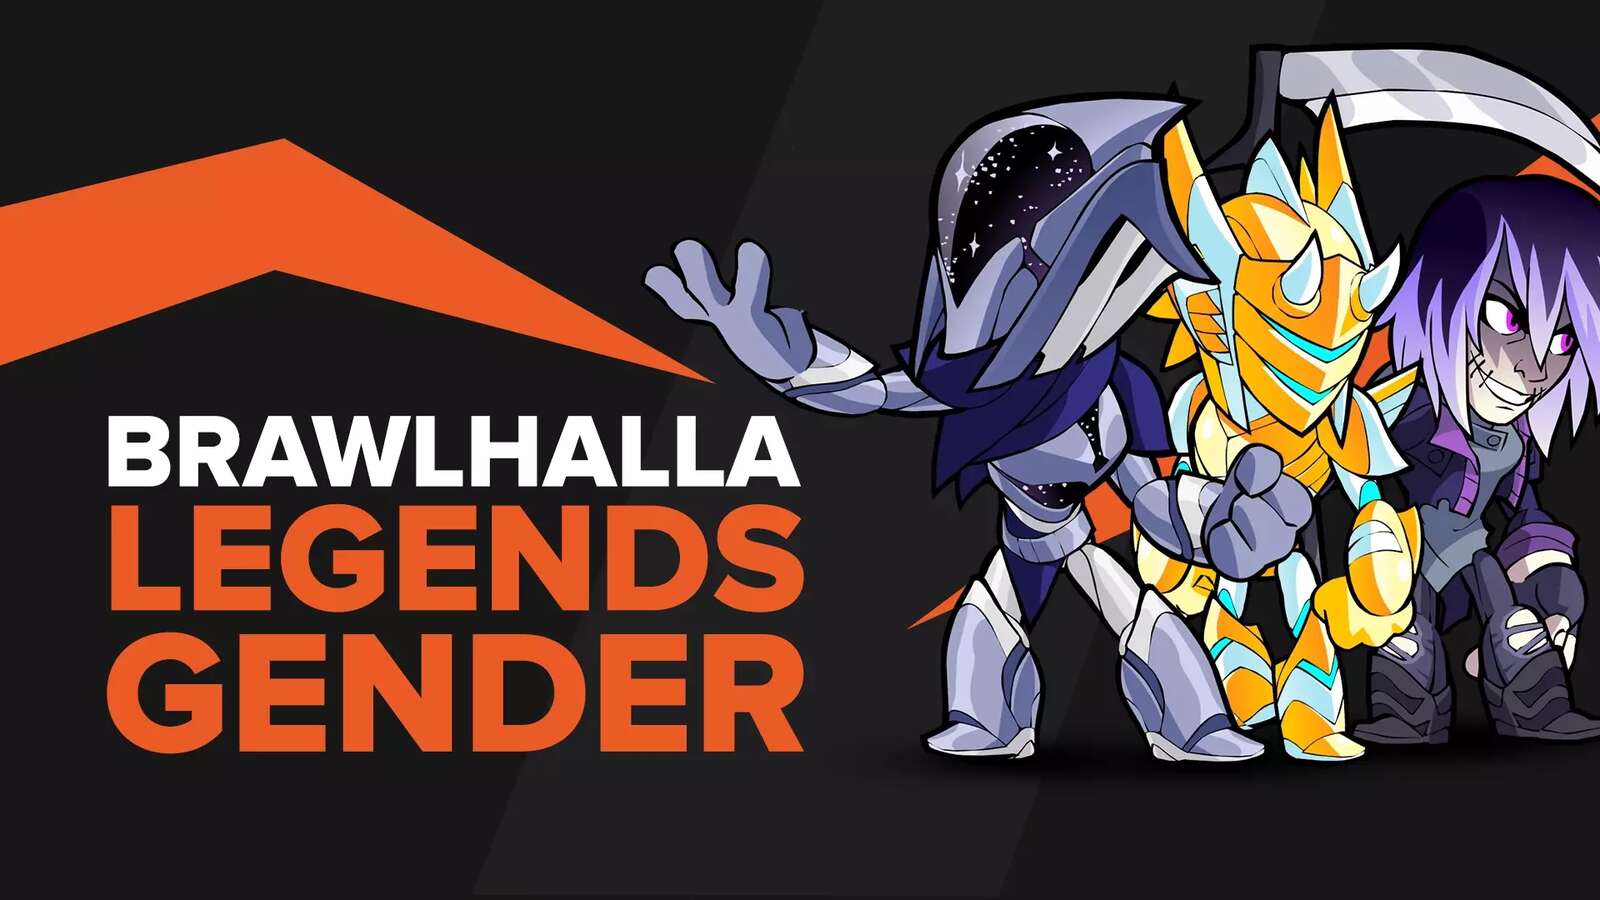 What is the gender of these Brawlhalla legends?